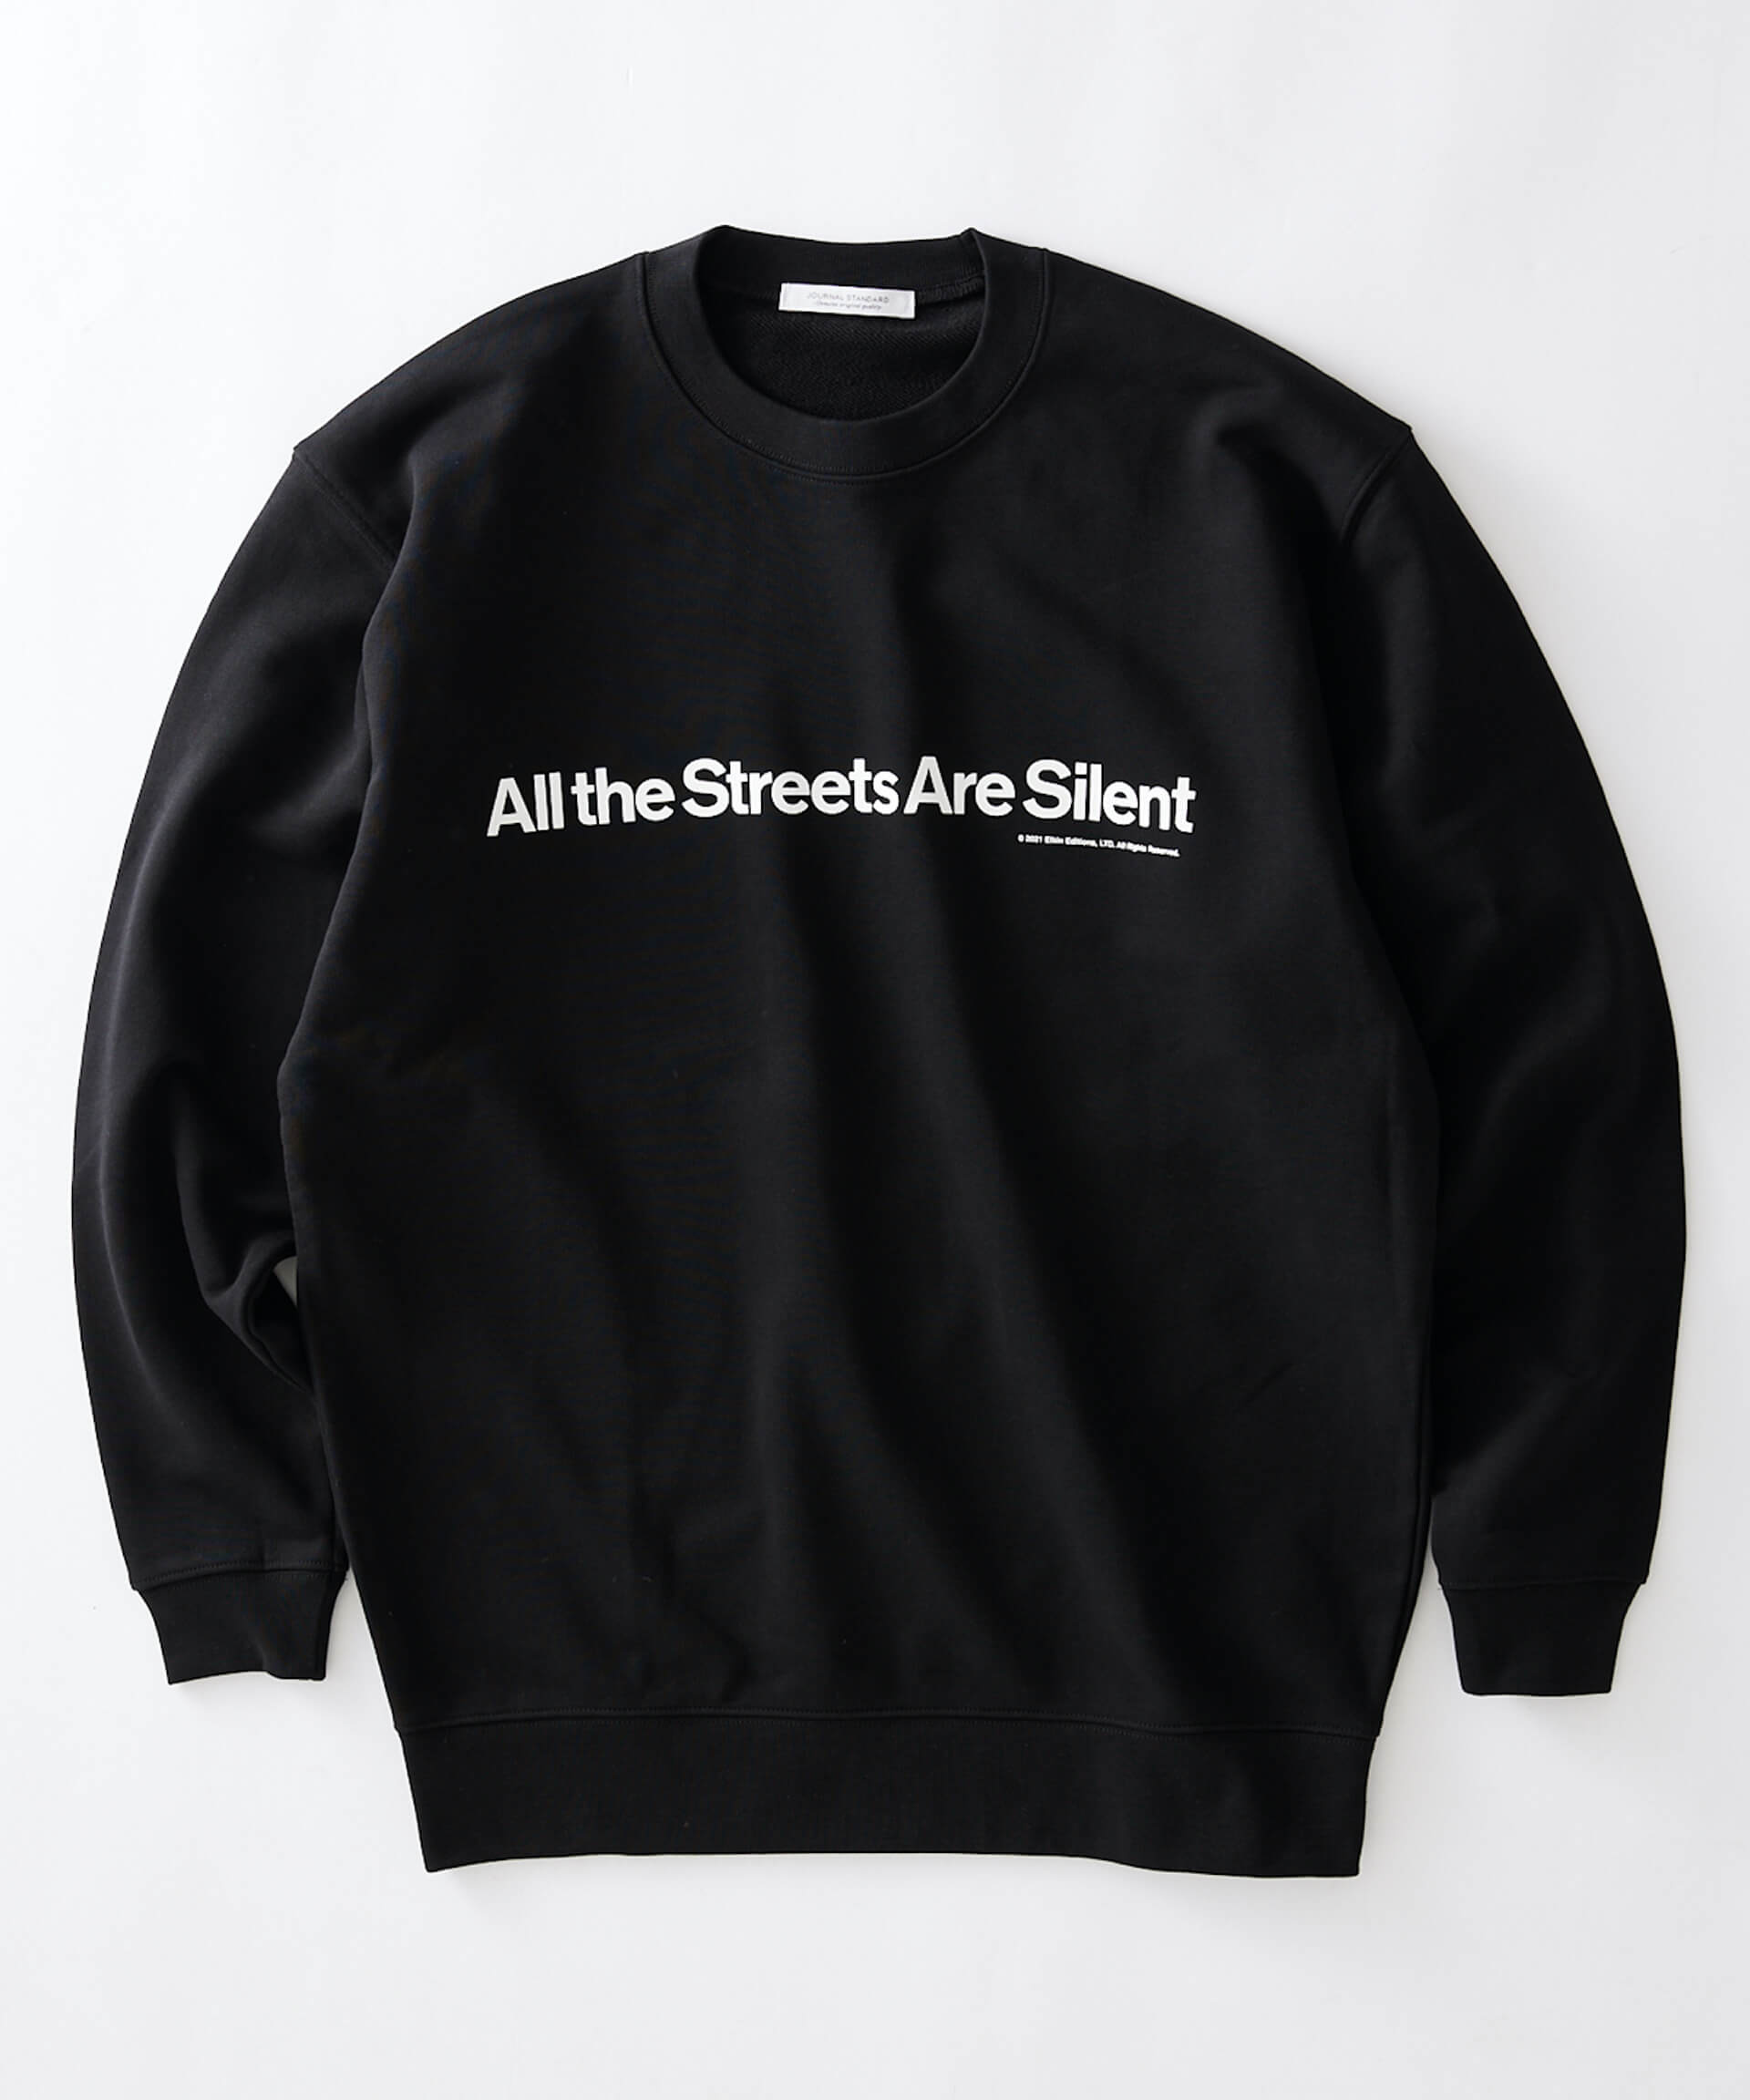 JOURNAL STANDARDと映画『All the Streets Are Silent』のコラボアイテムが登場 fashion221025-journalstandard6